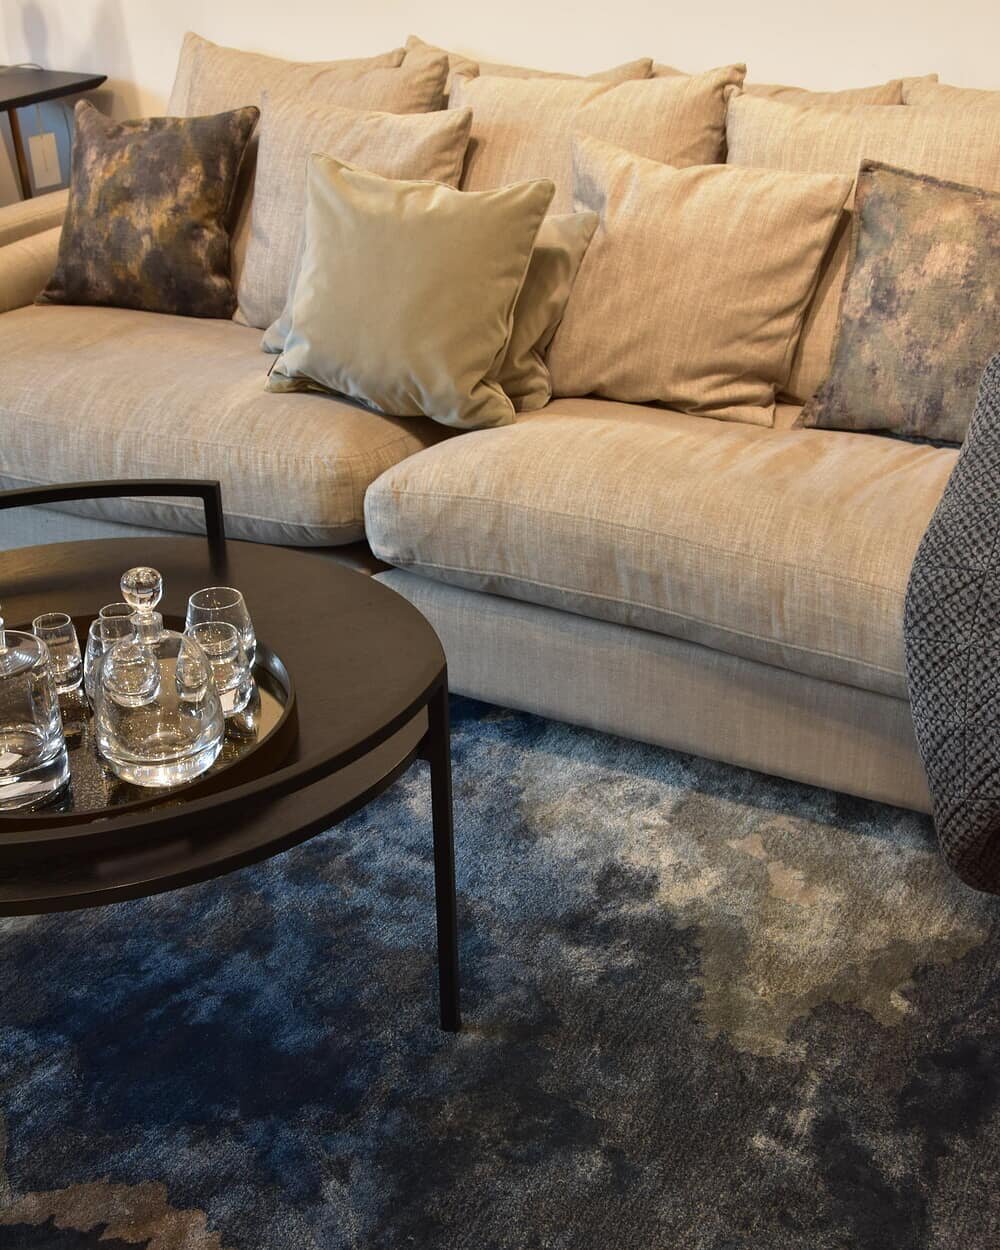 Highlighting our fabric and new range of Rugs which complement each other so well.

Pictured here we have the sofa covered in Viento fabric, cushions in Impresso and the rug is the Escape Blue.

💙
💙
💙

#nordicstyle #scandistyle #floorart #handmade